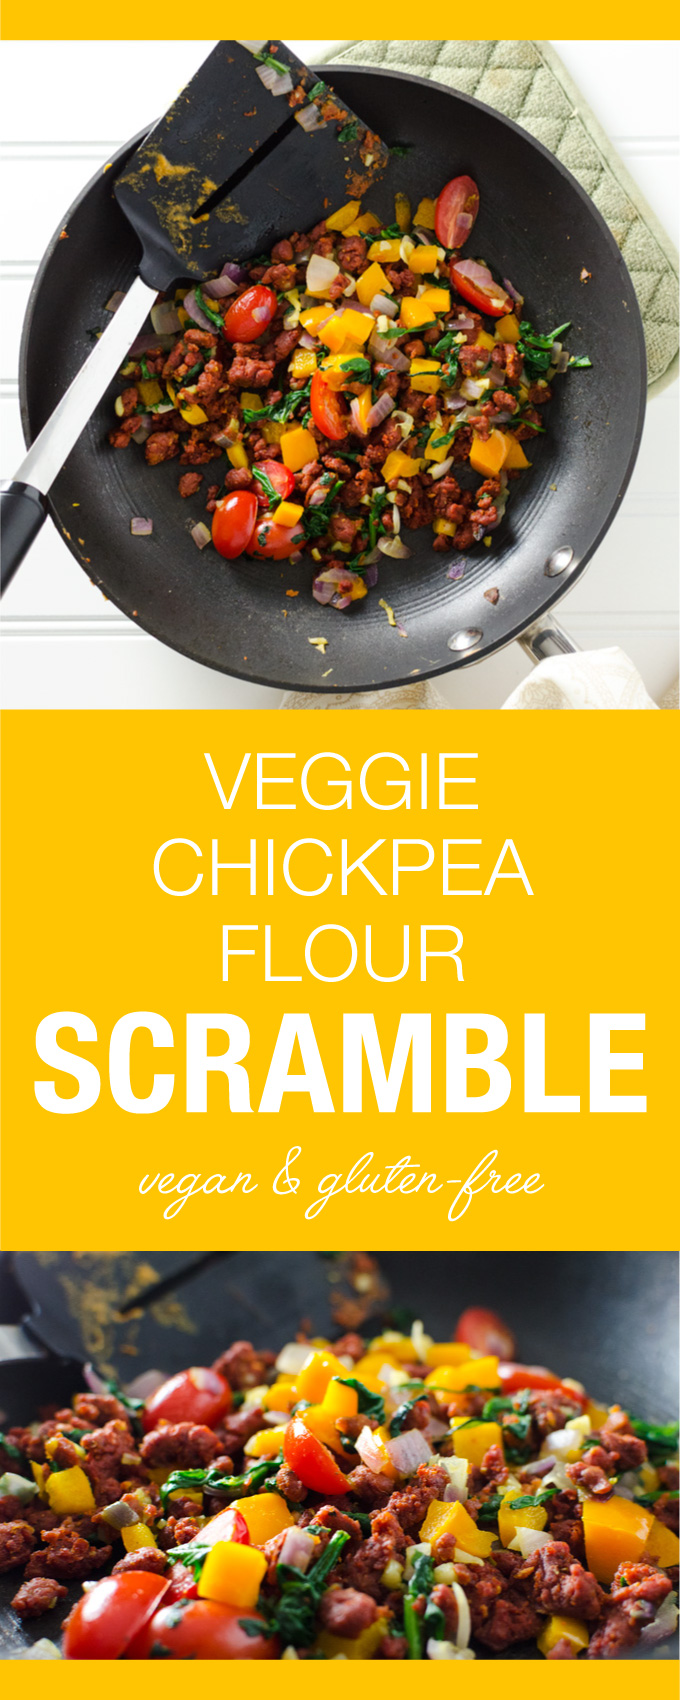 Veggie Chickpea Flour Scramble - this vegan gluten-free recipe is my plant-based version of a western omelet. The savory mixture is loaded with flavor and healthy protein. | VeggiePrimer.com